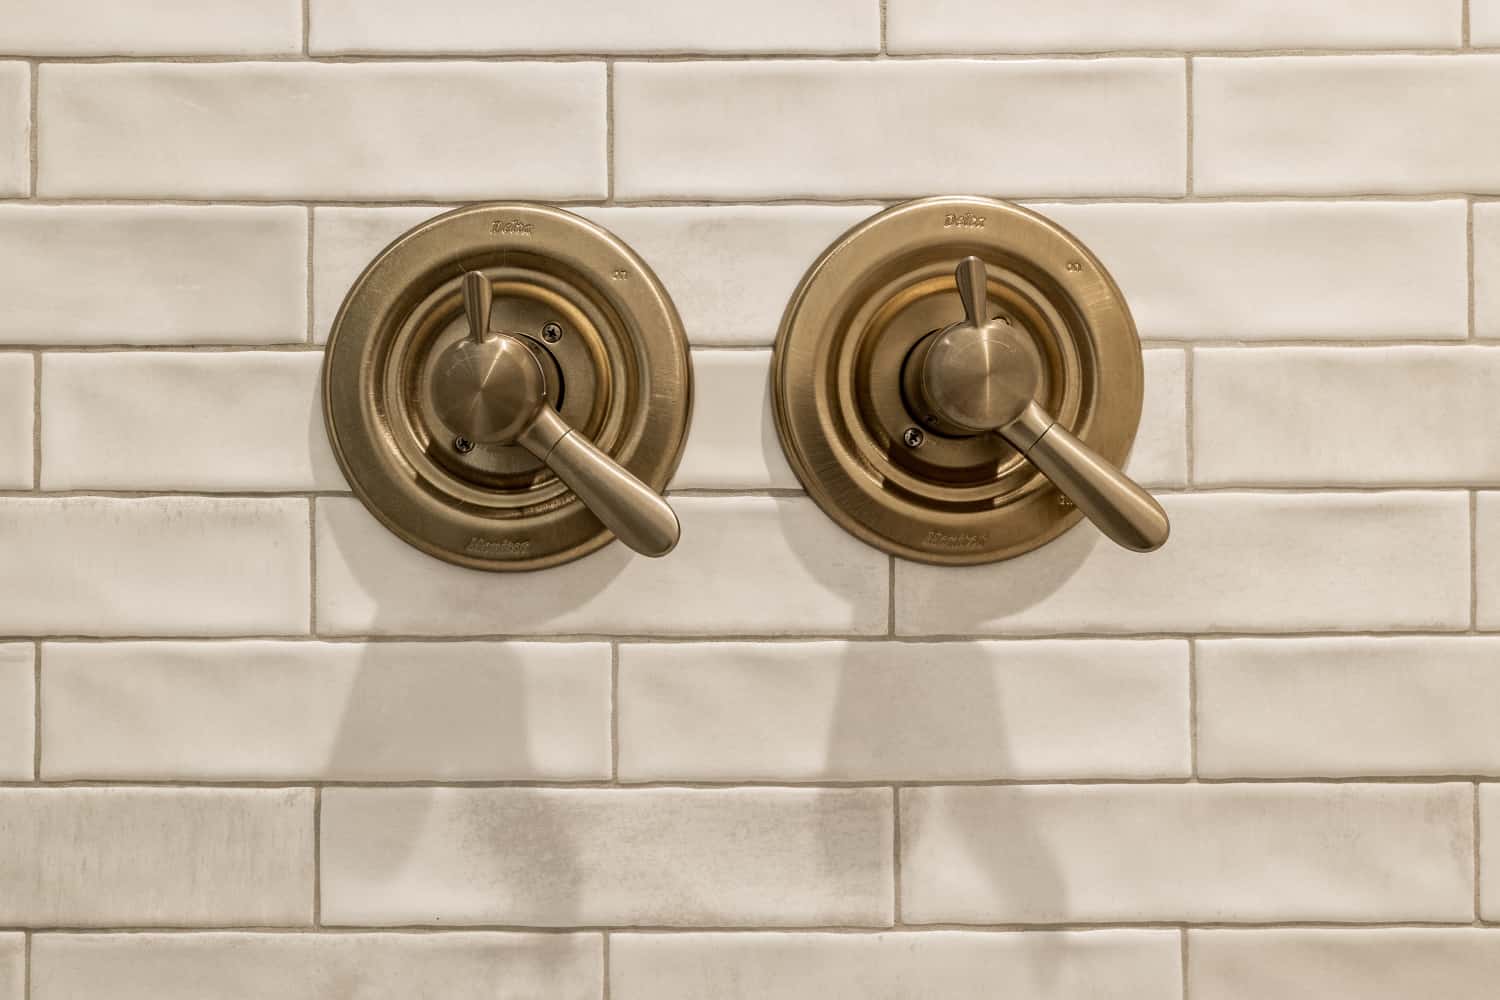 Nicholas Design Build | Two modern brass faucets on a white tiled wall.